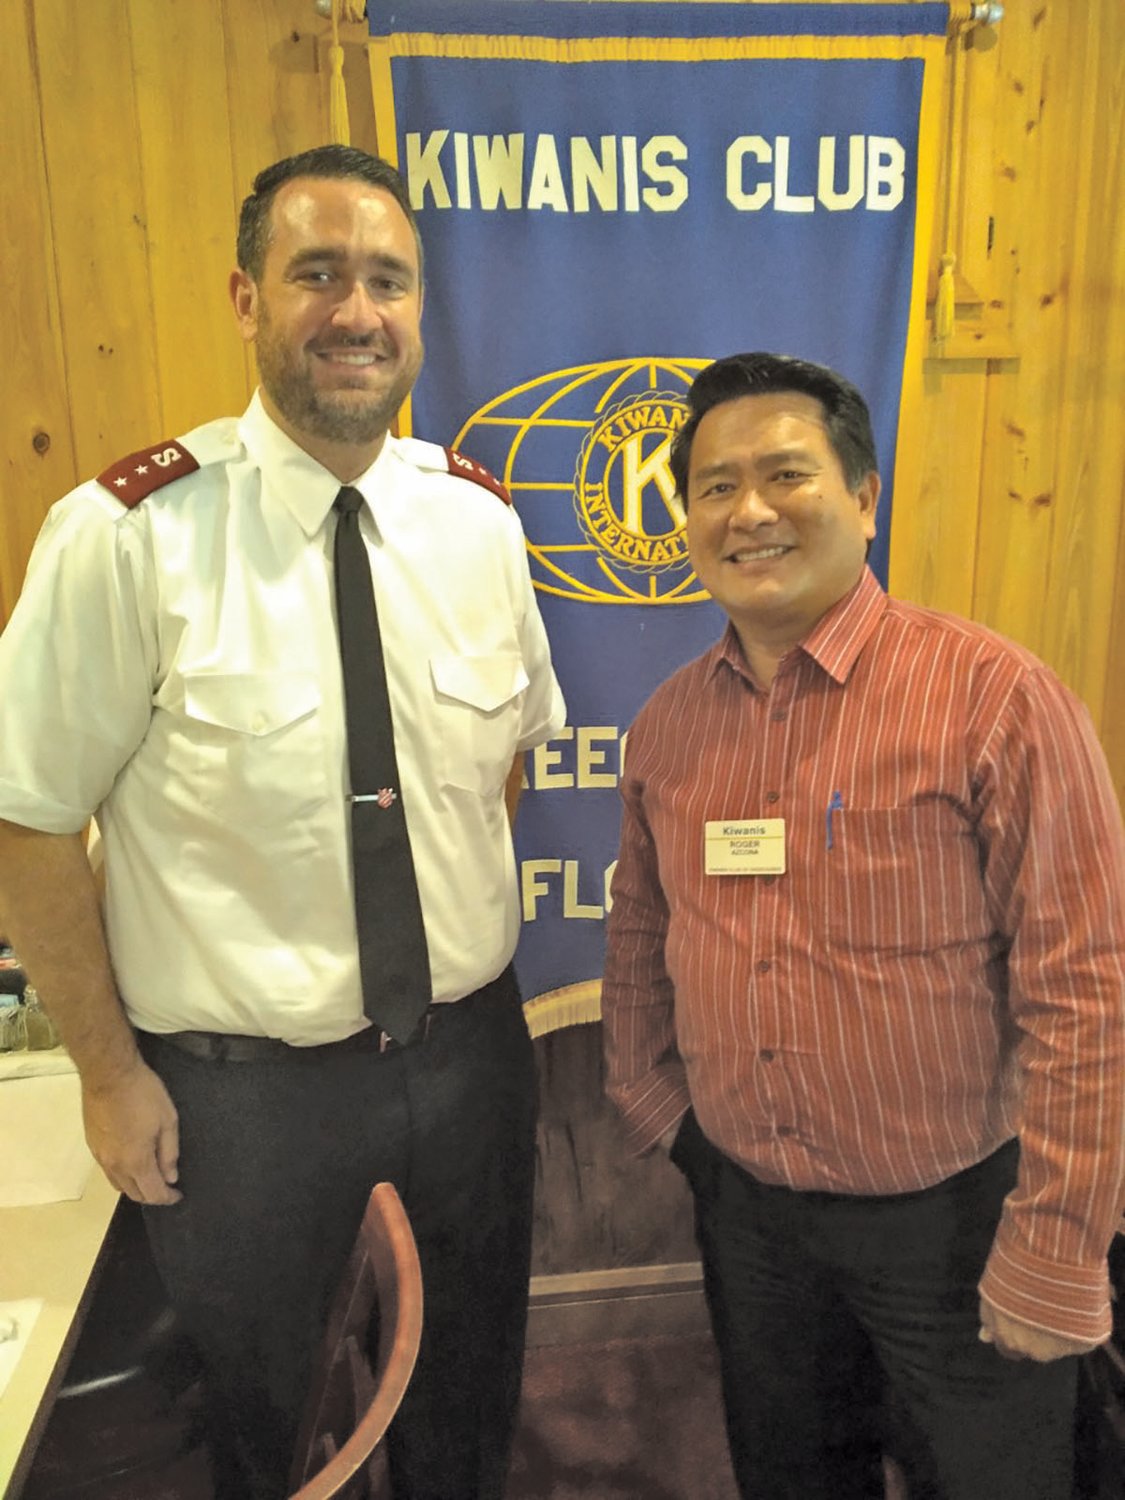 Pictured with Capt. Jeff (L) is Kiwanis VP Roger Azcona (R).